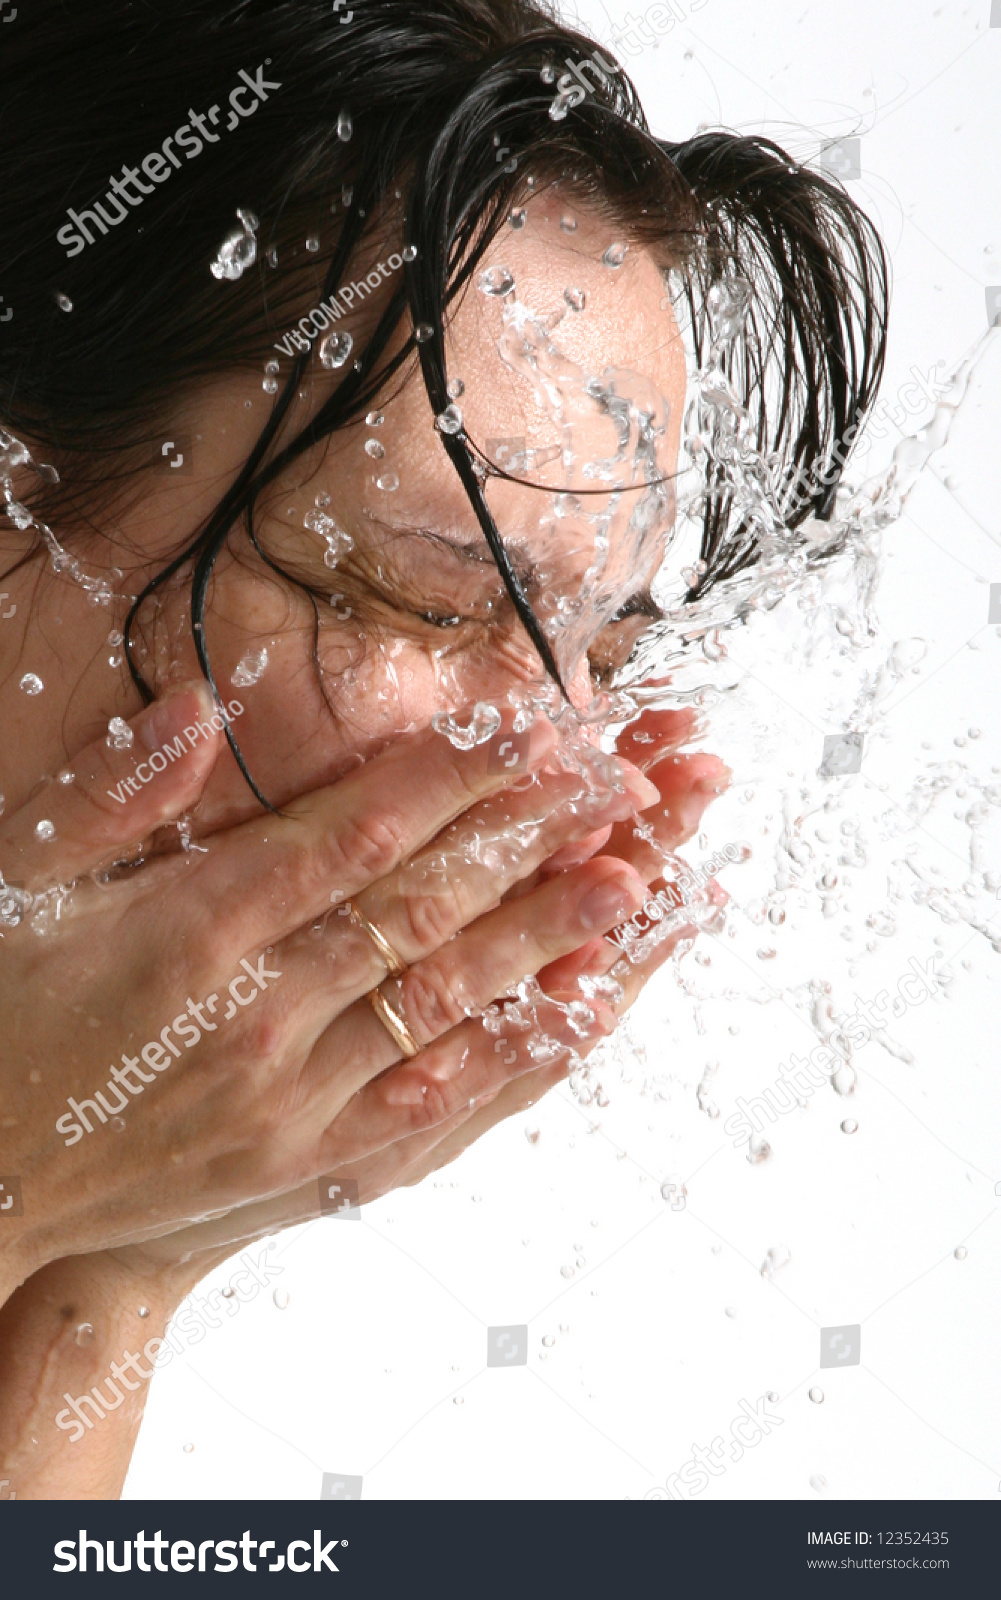 Beautiful woman washing her face (on white background) #12352435